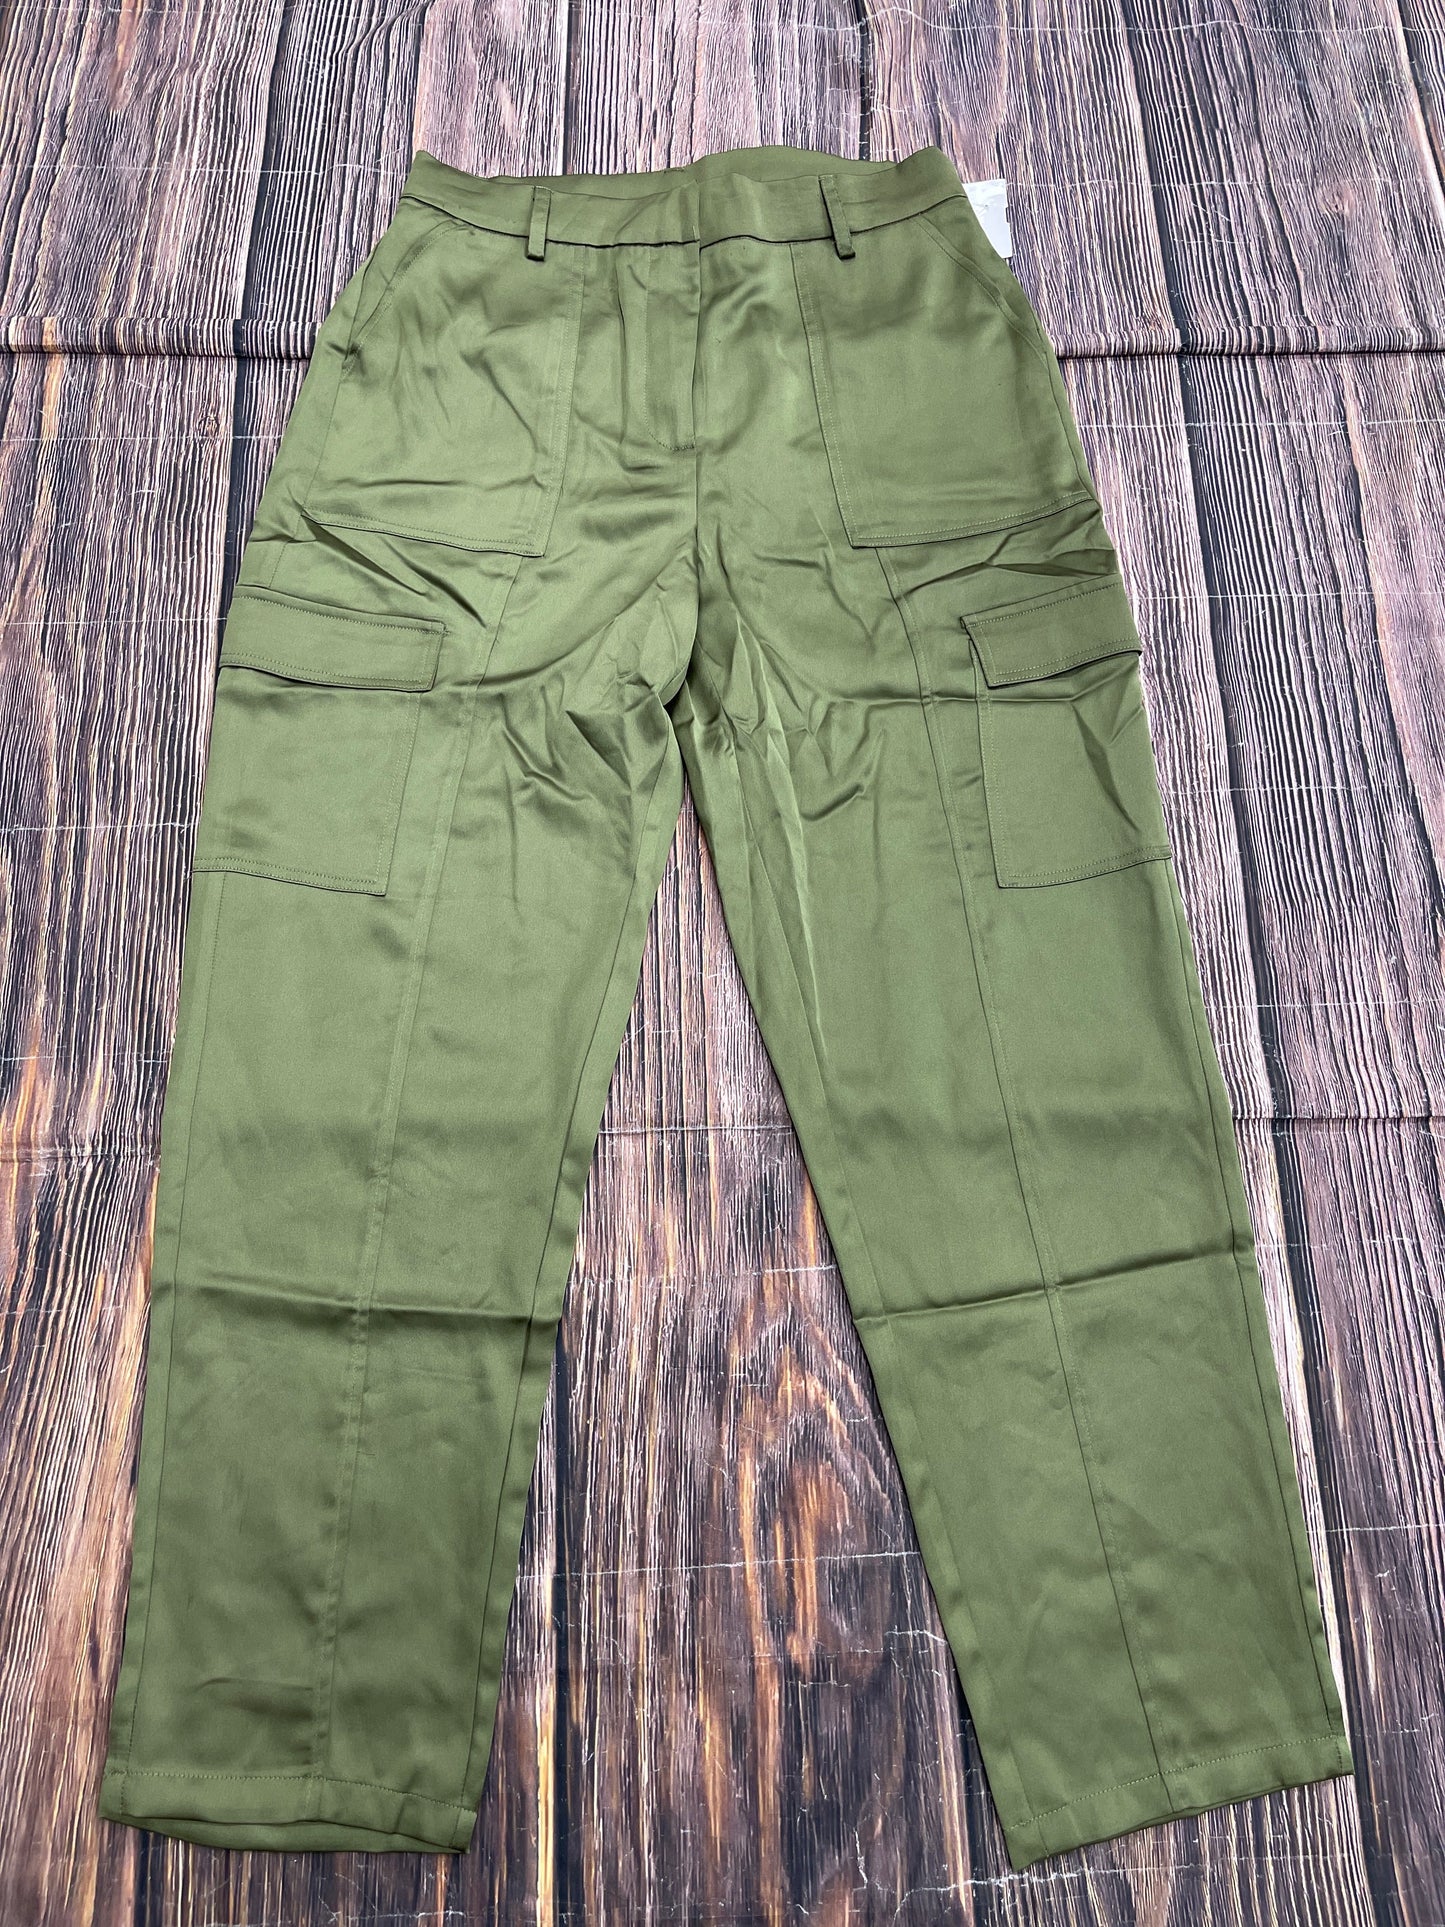 Pants Cargo & Utility By Bailey 44 Size 6